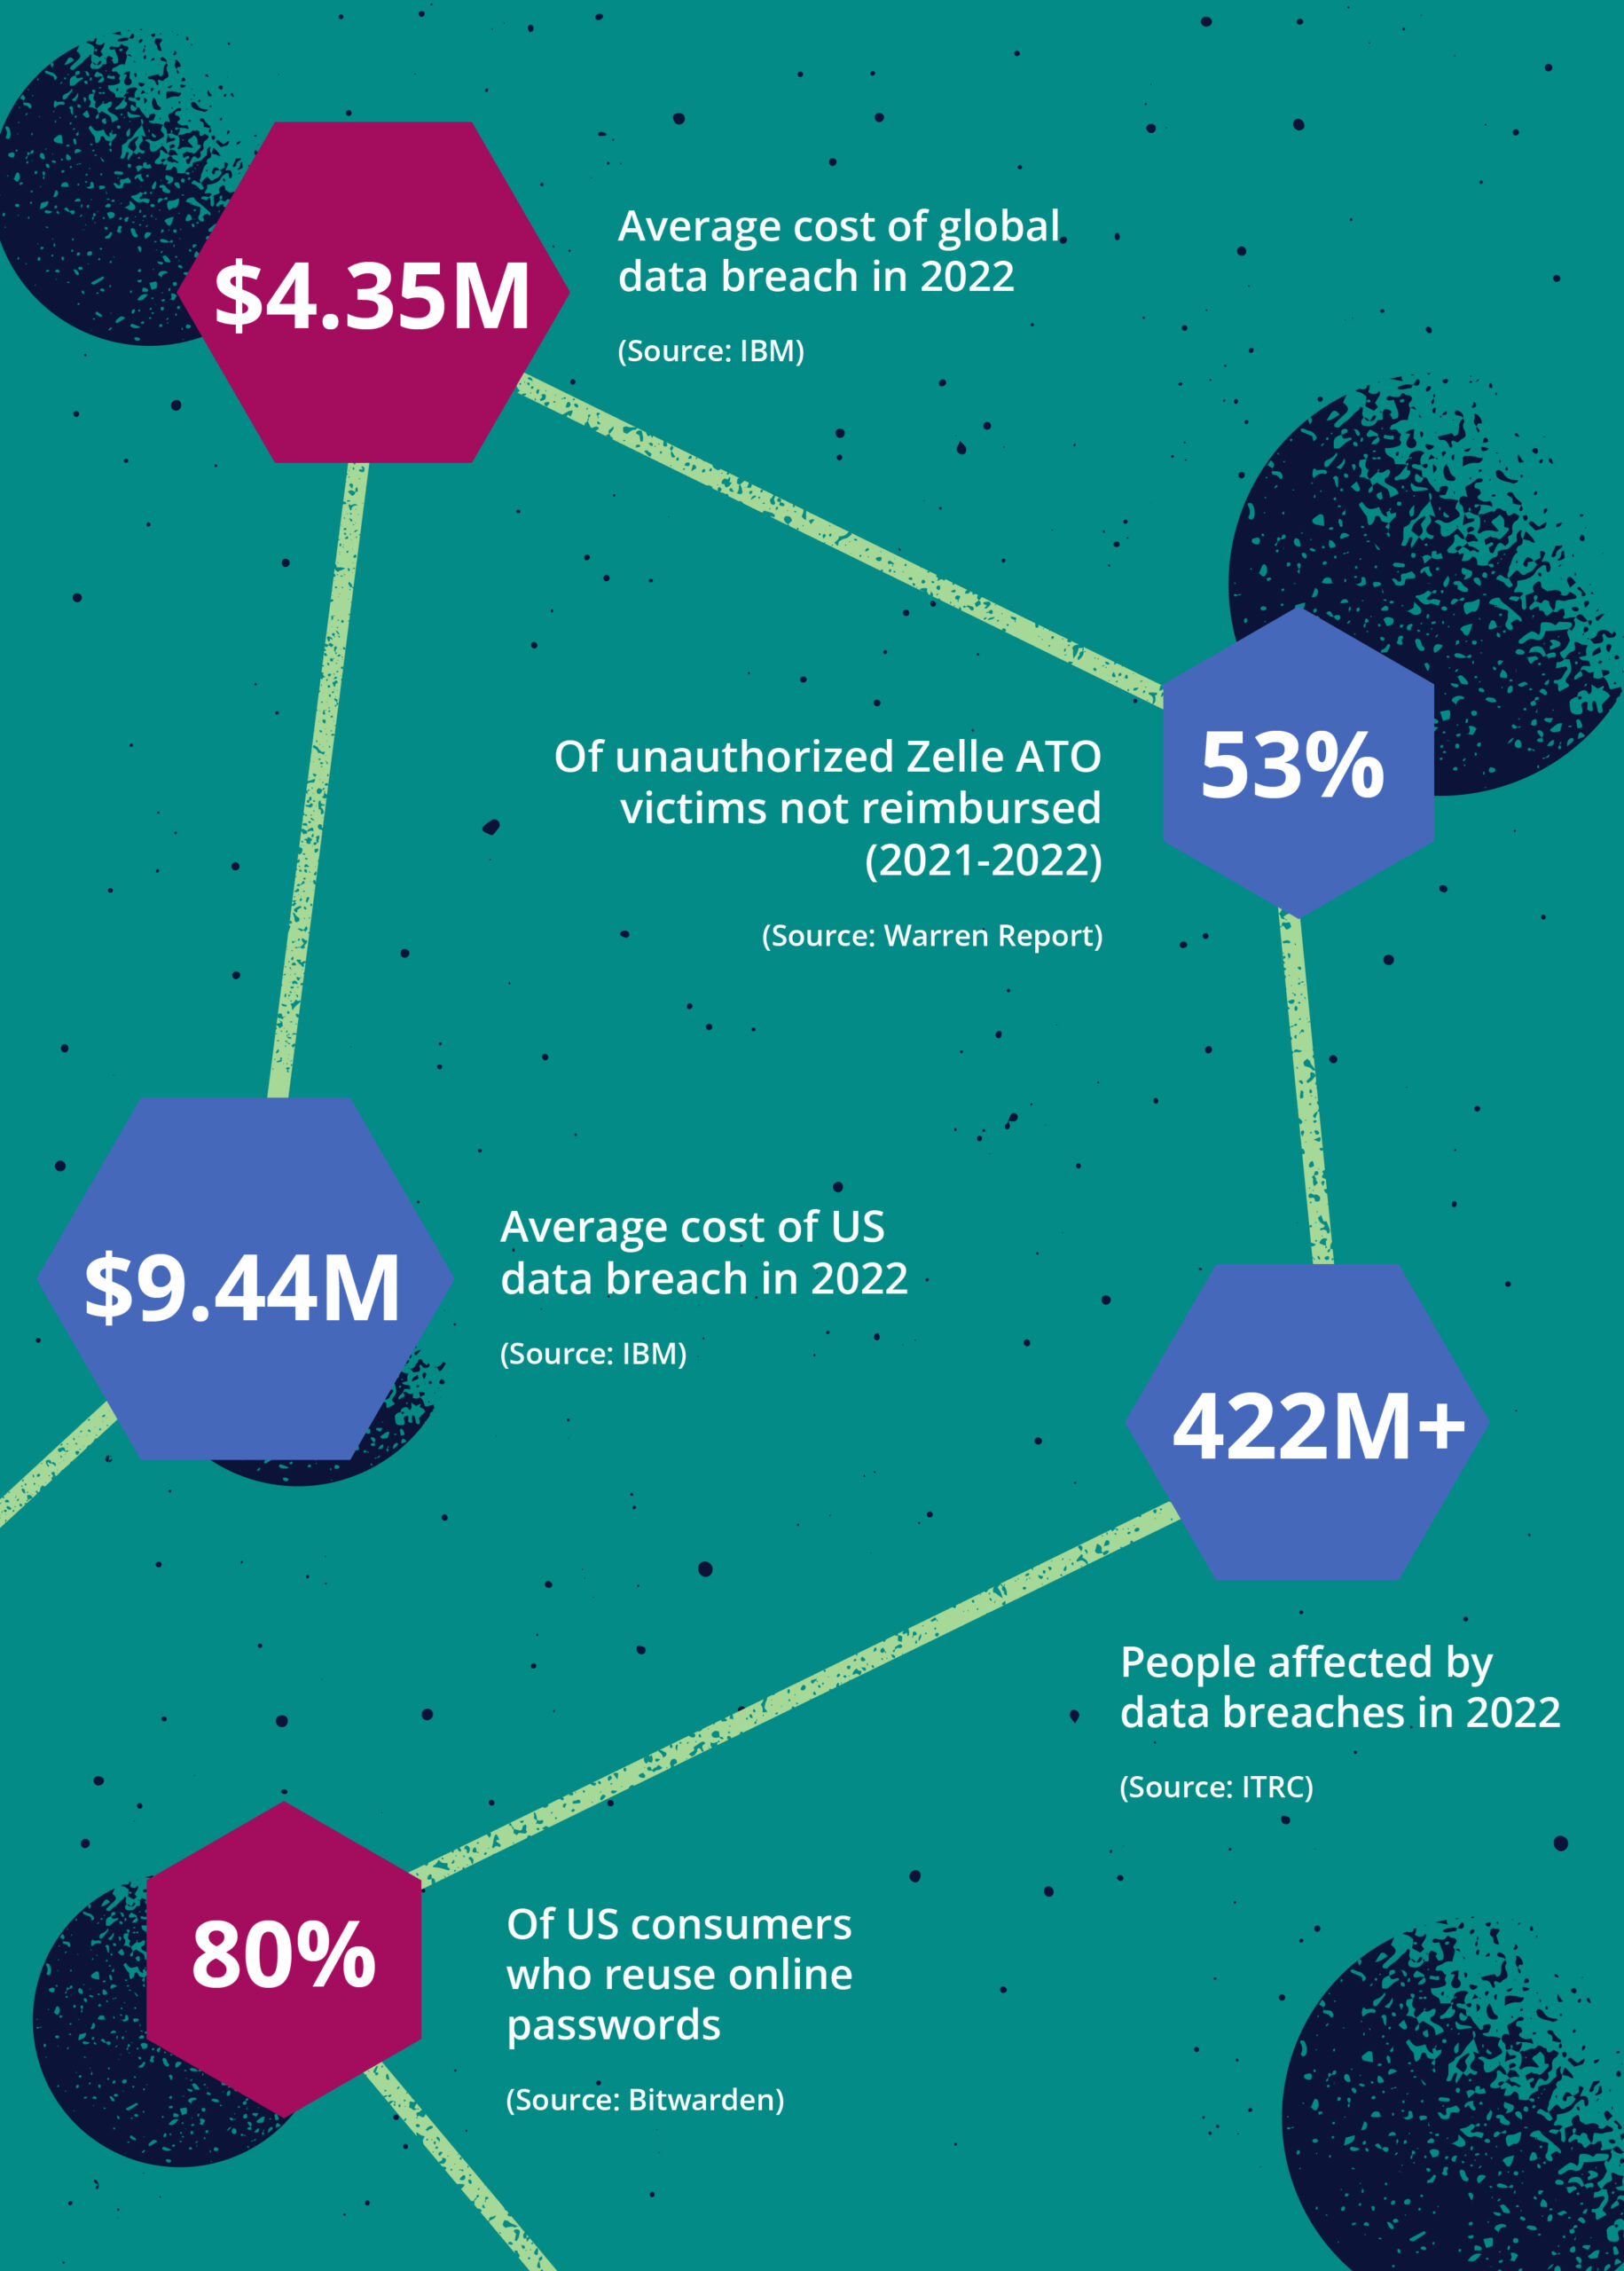 Image detailing 2022 ATO Fraud Losses: $9.44M average cost of US data breach in 2022 (Source: IBM); $4.35M average cost of global data breach in 2022 (Source: IBM); 53% of unauthorized Zelle ATO victims not reimbursed (2021-2022) (Source: Warren Report); 422M+ people affected by data breaches in 2022 (Source: ITRC); 80% of US consumers who reuse online passwords (Source: Bitwarden)